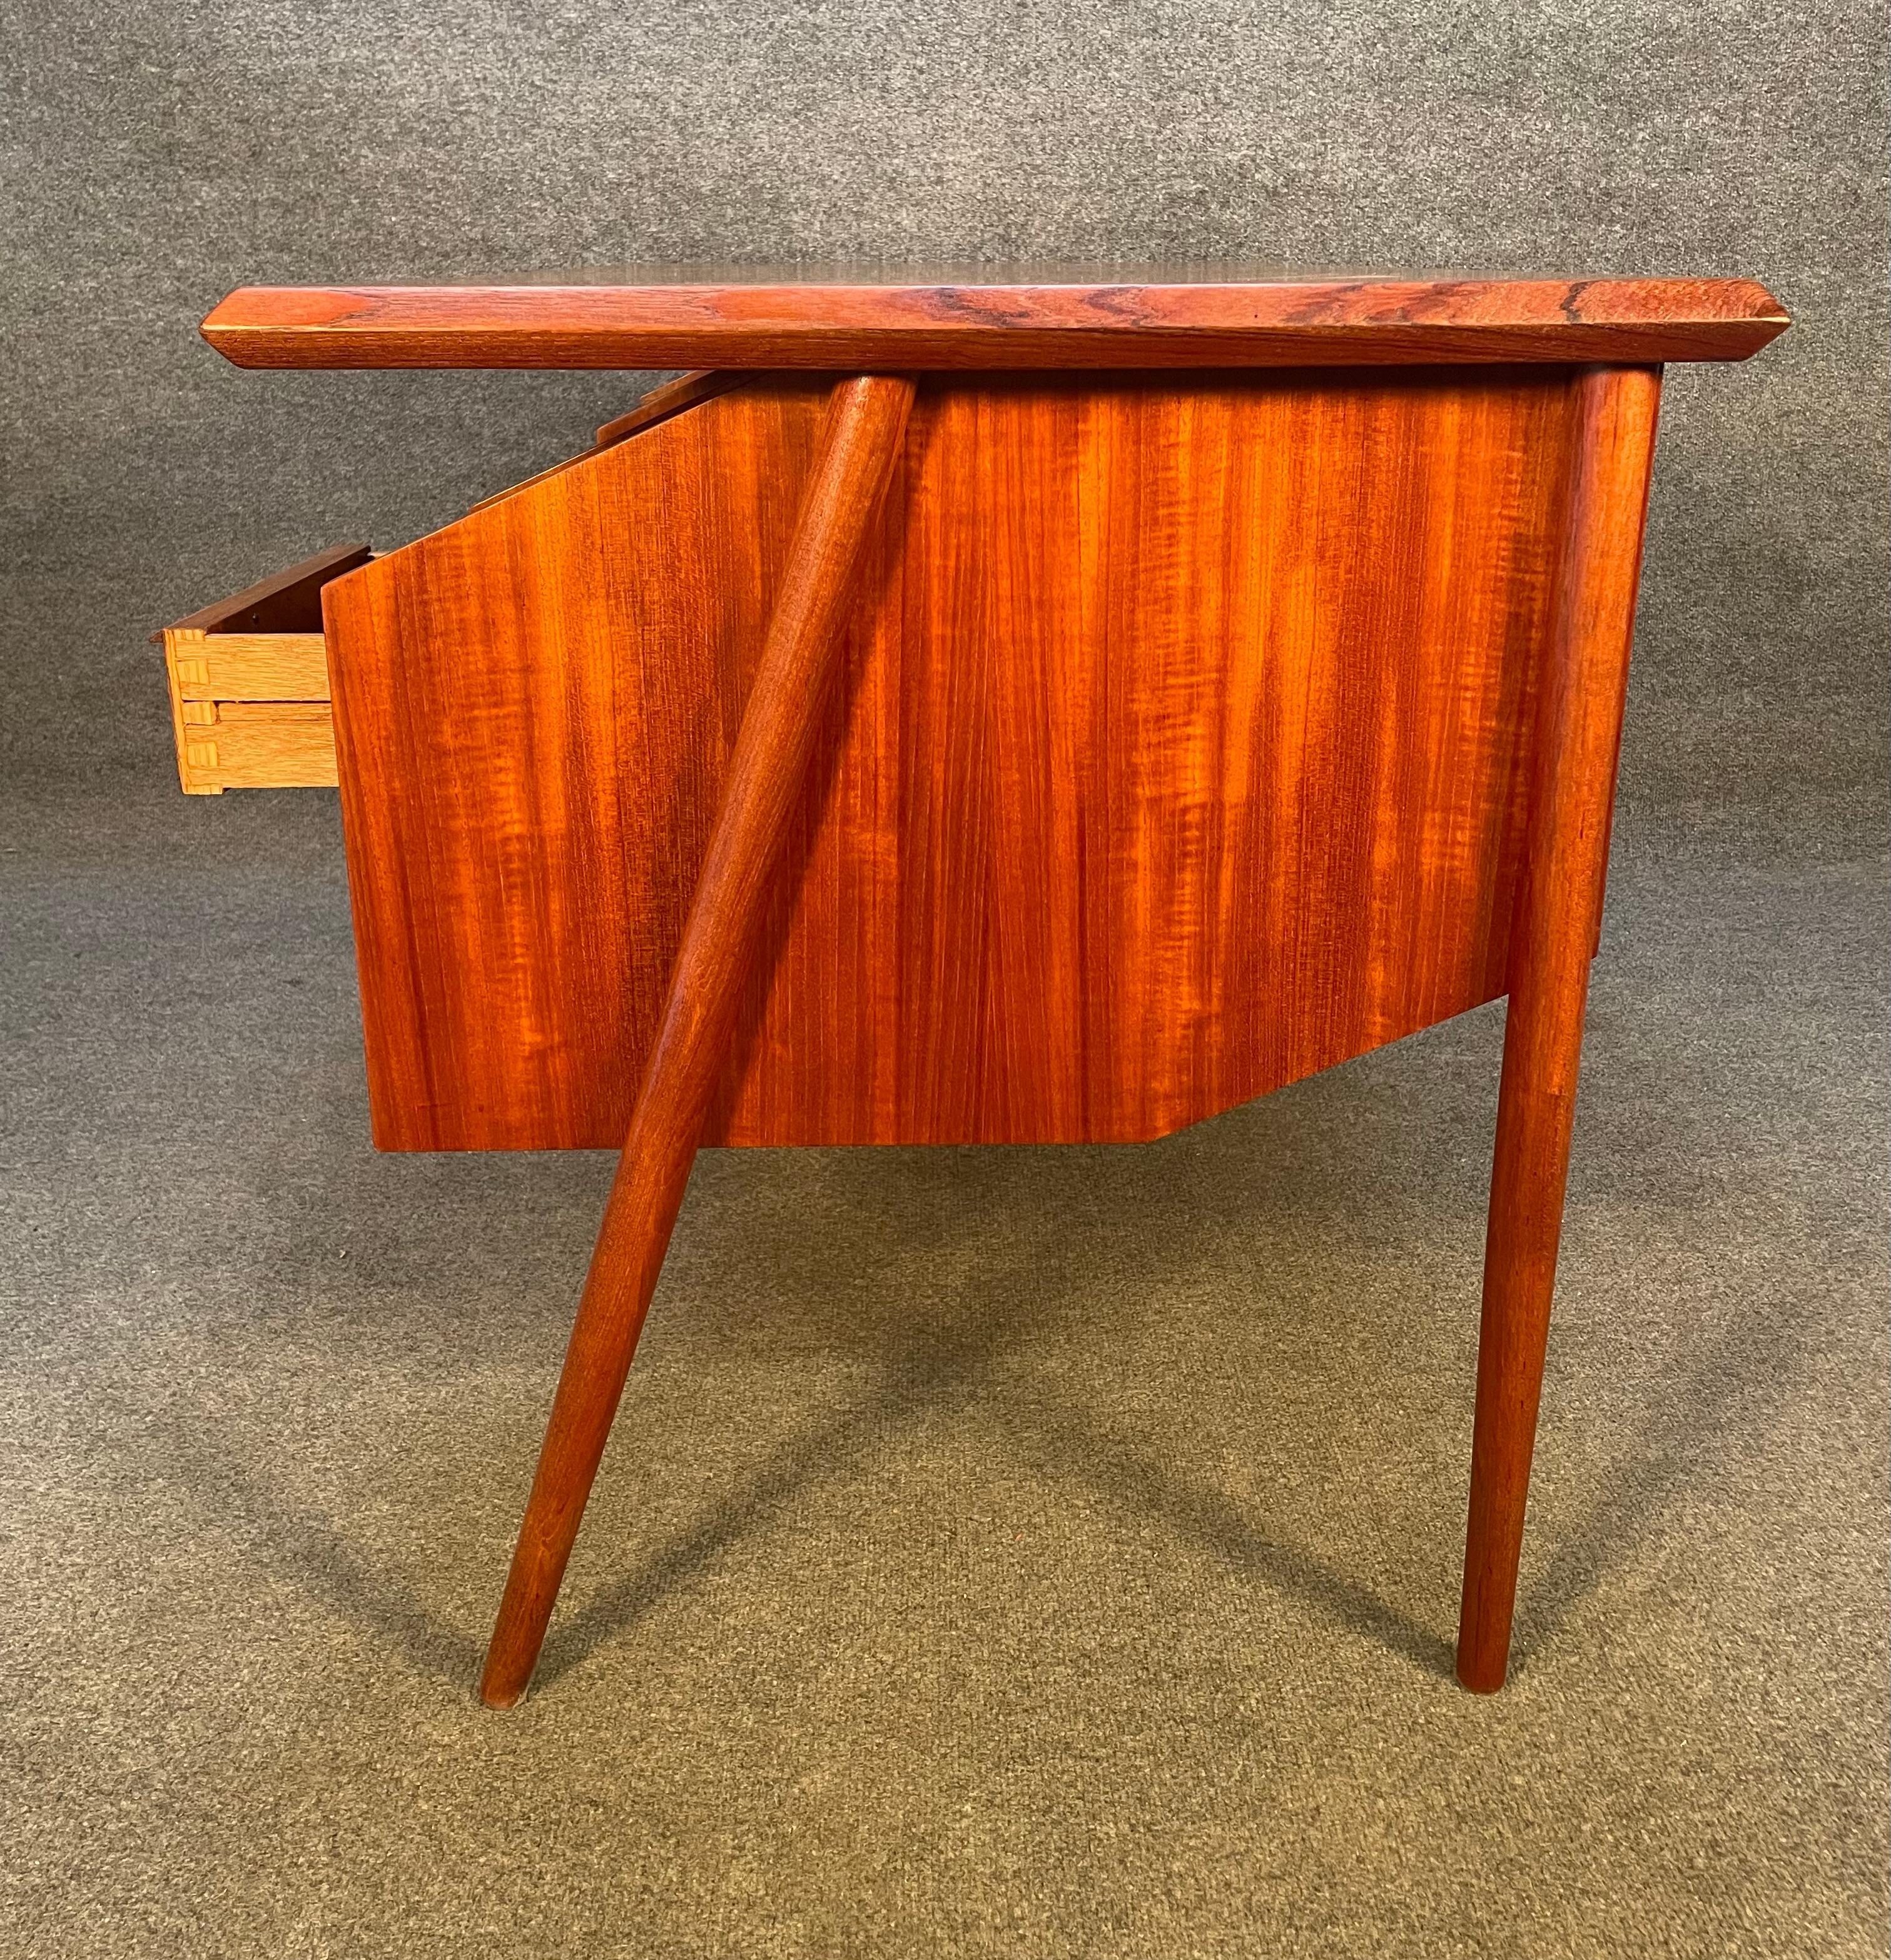 Here is a beautiful Scandinavian modern teak desk manufactured in Denmark in the 1960's recently imported from Europe to California before its refinishing.
This exquisite desk features a large top showing vibrant wood grain, two banks of three dove